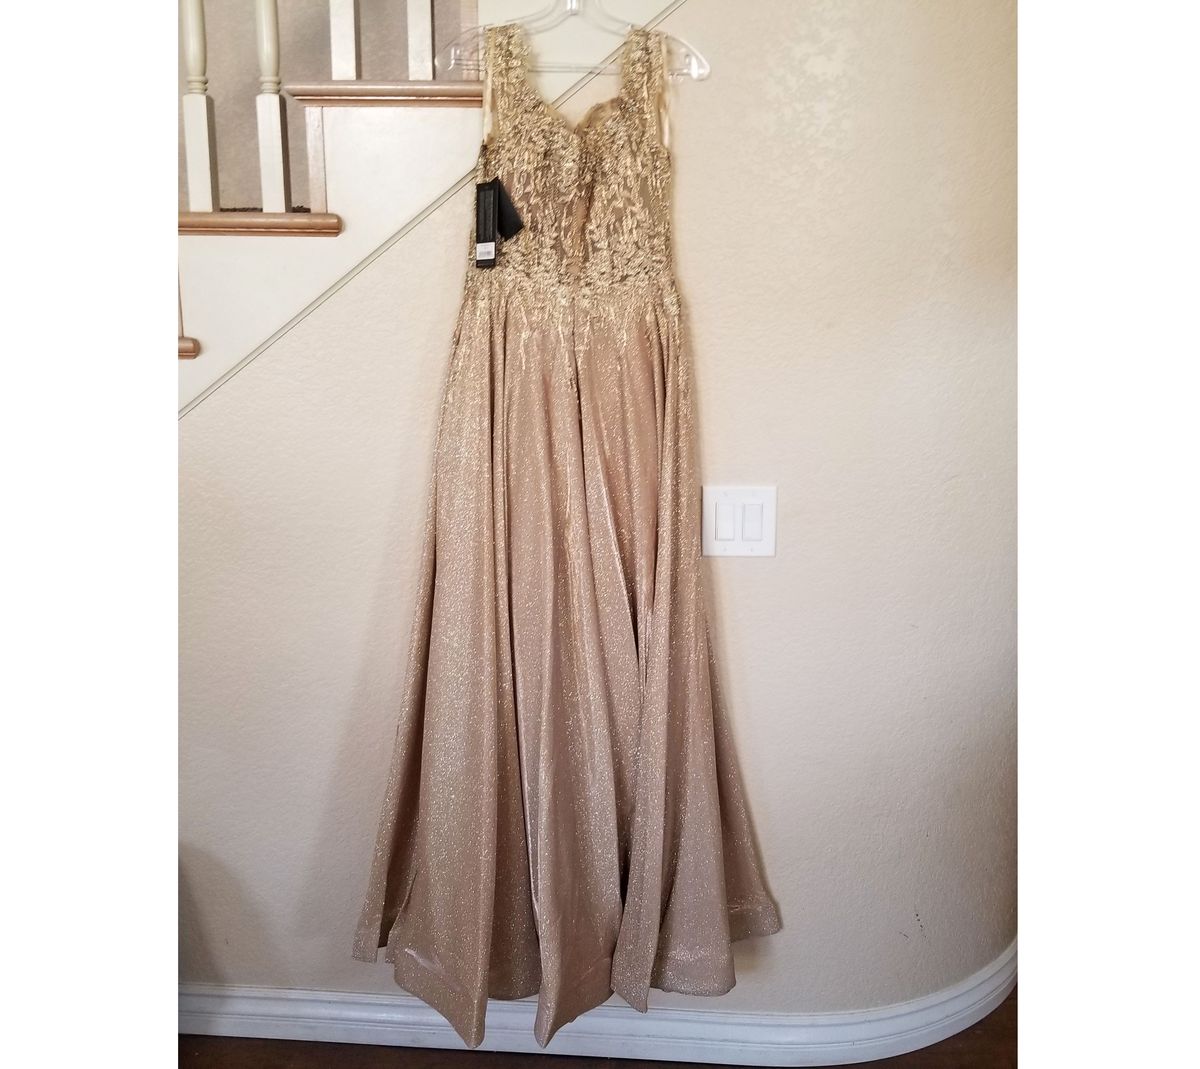 Style Gold Sweetheart Neckline Beaded Floral Filigree Ball Gown Bicici & Coty Size 8 Off The Shoulder Floral Gold Ball Gown on Queenly